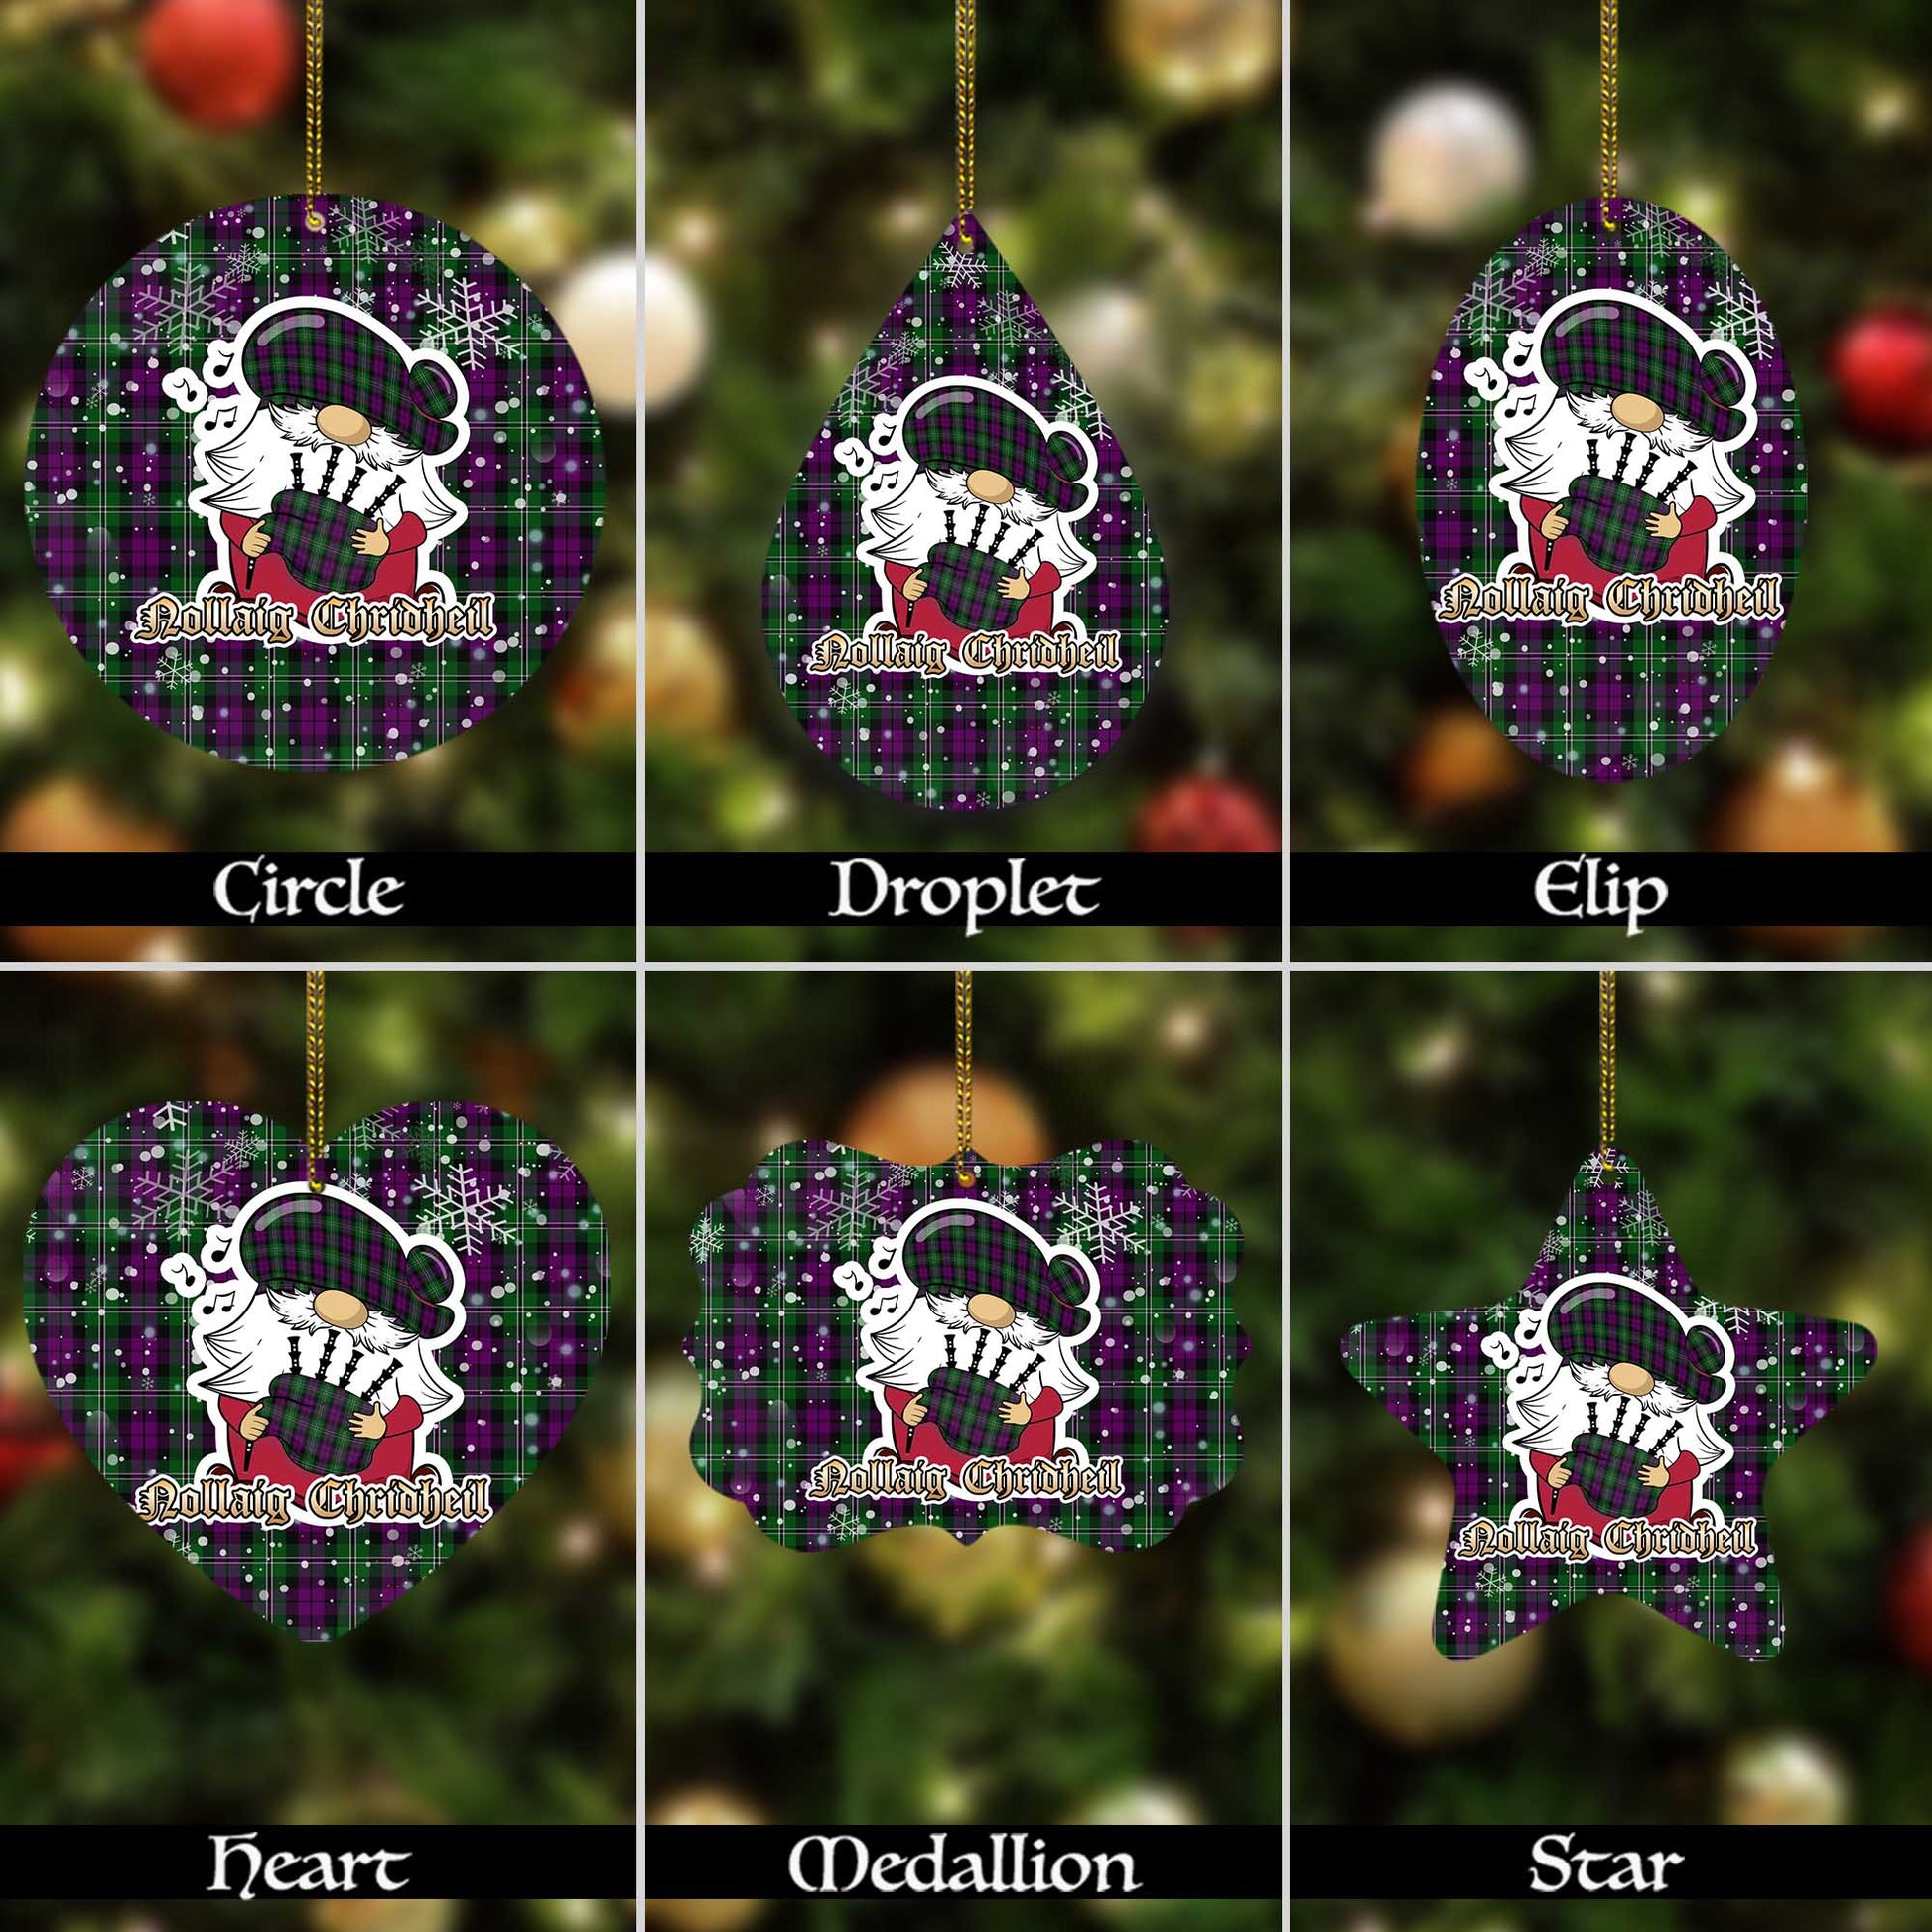 wilson-tartan-christmas-ornaments-with-scottish-gnome-playing-bagpipes